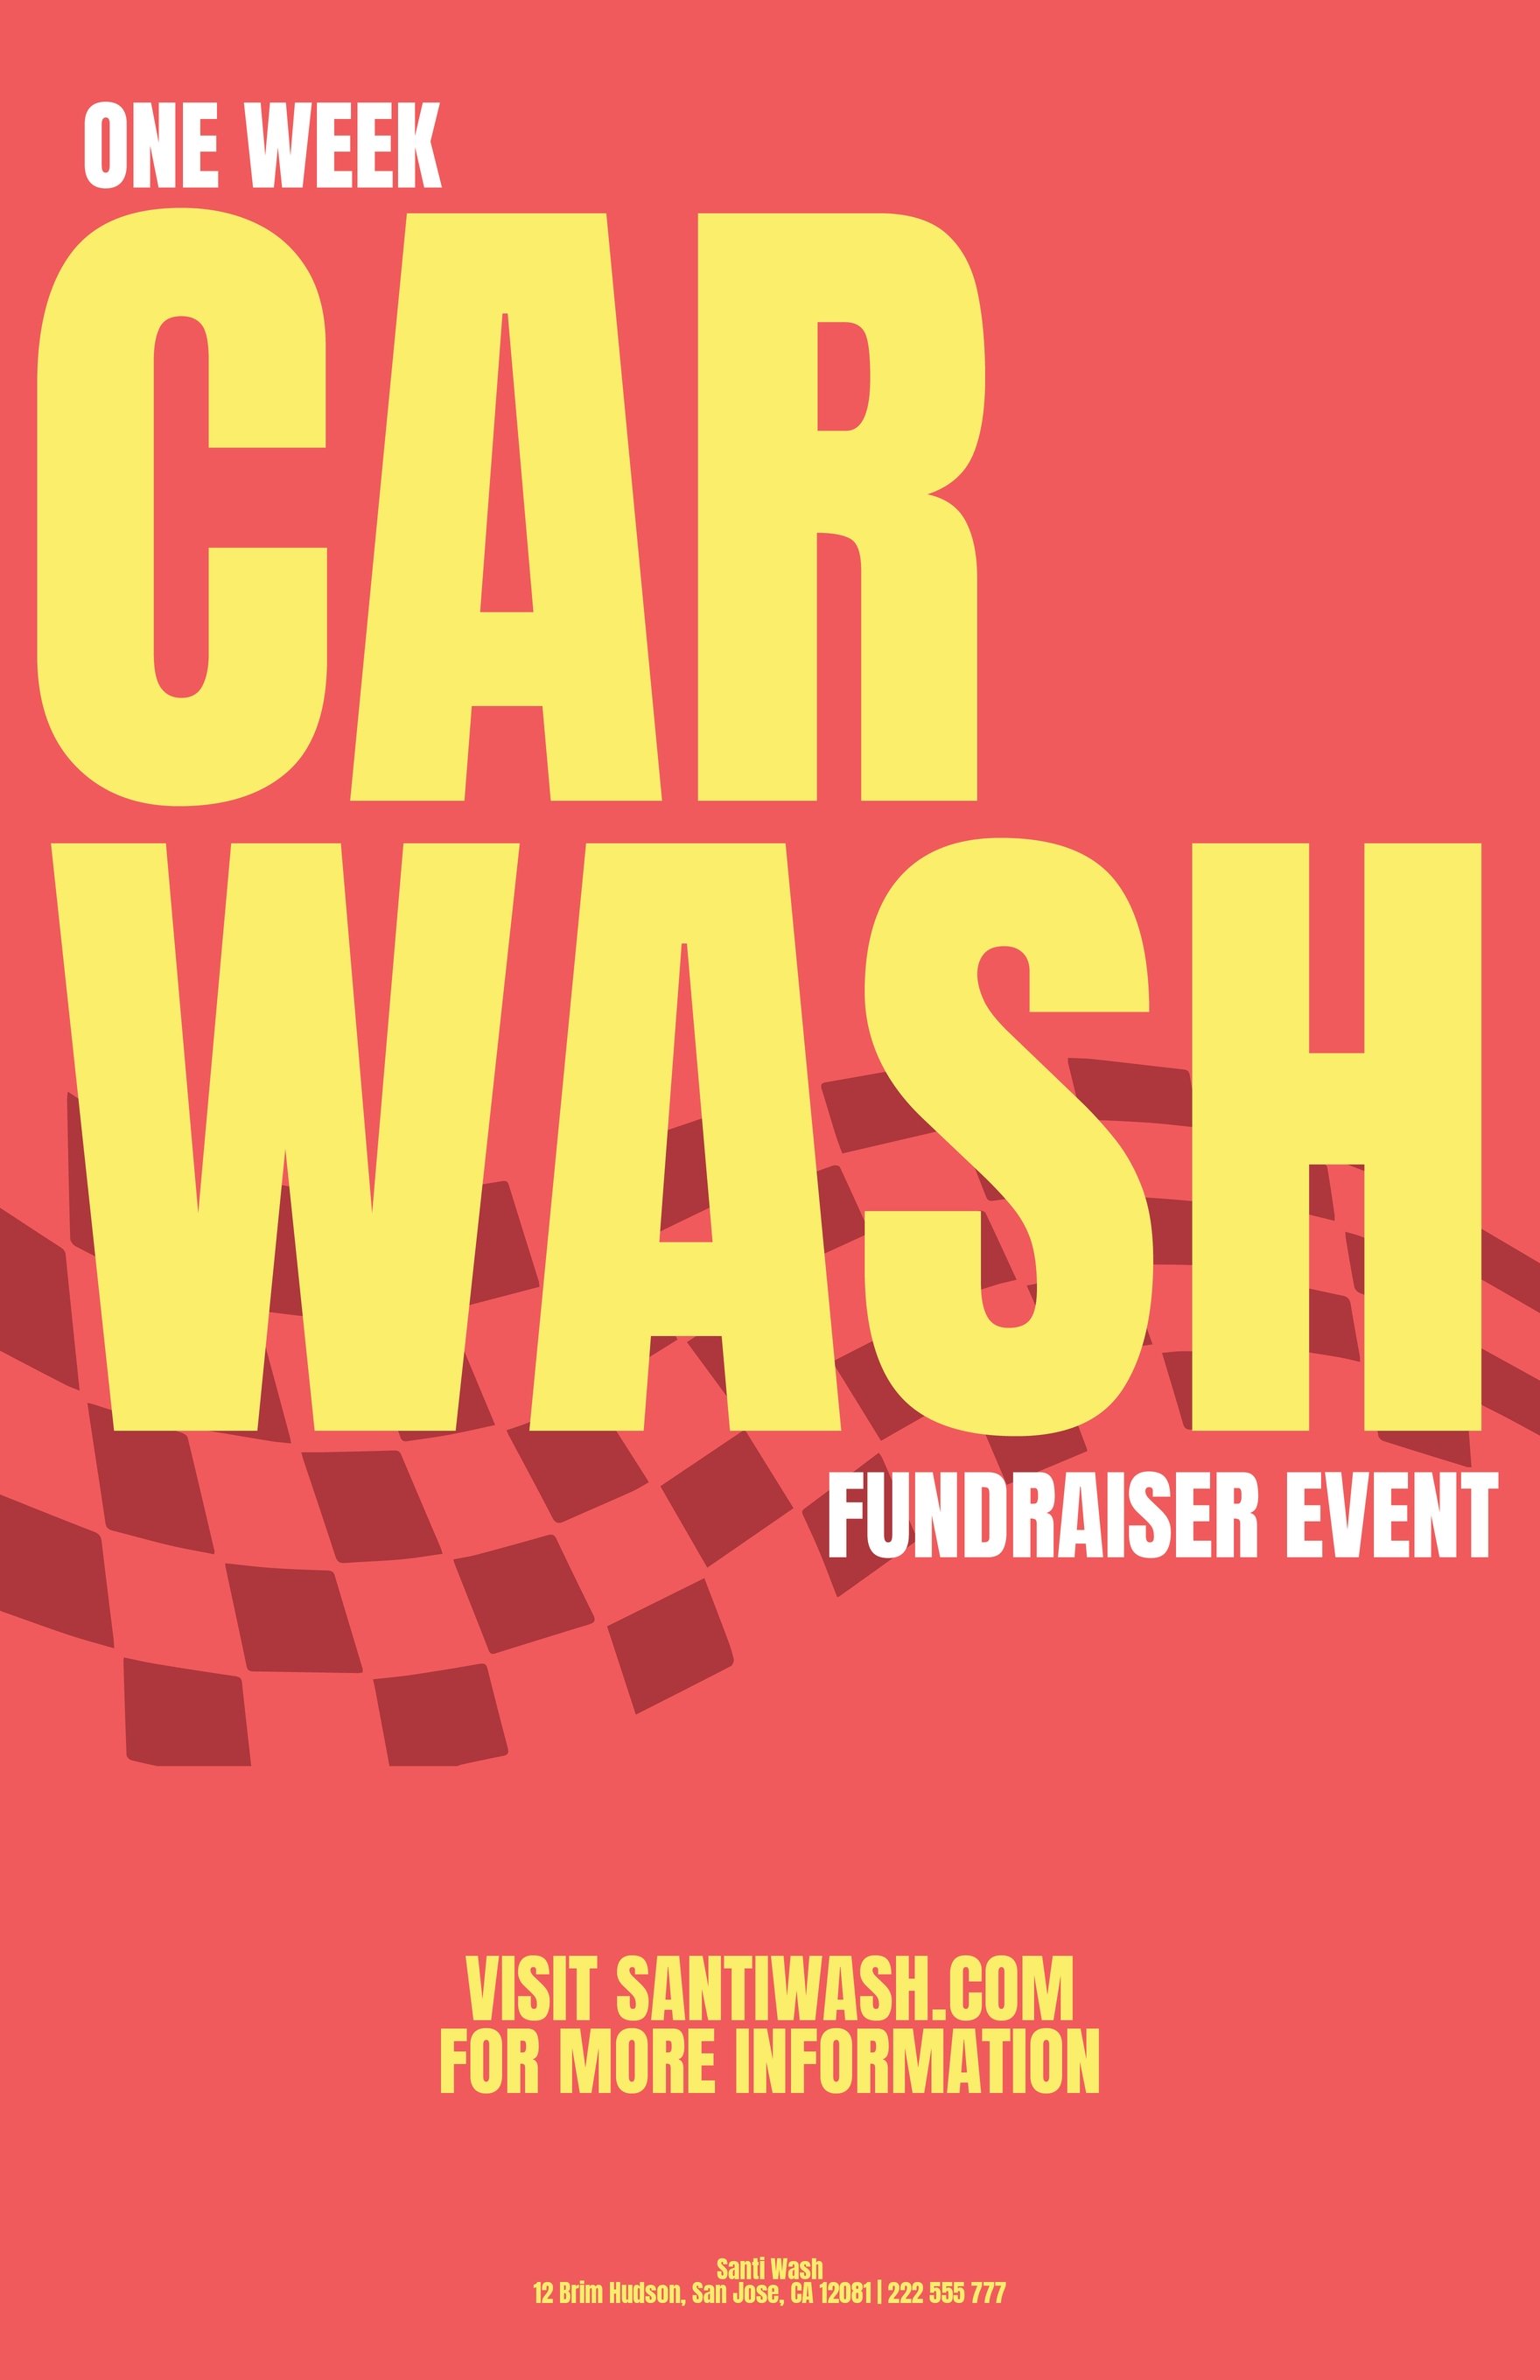 Fundraiser Car Wash Poster Template